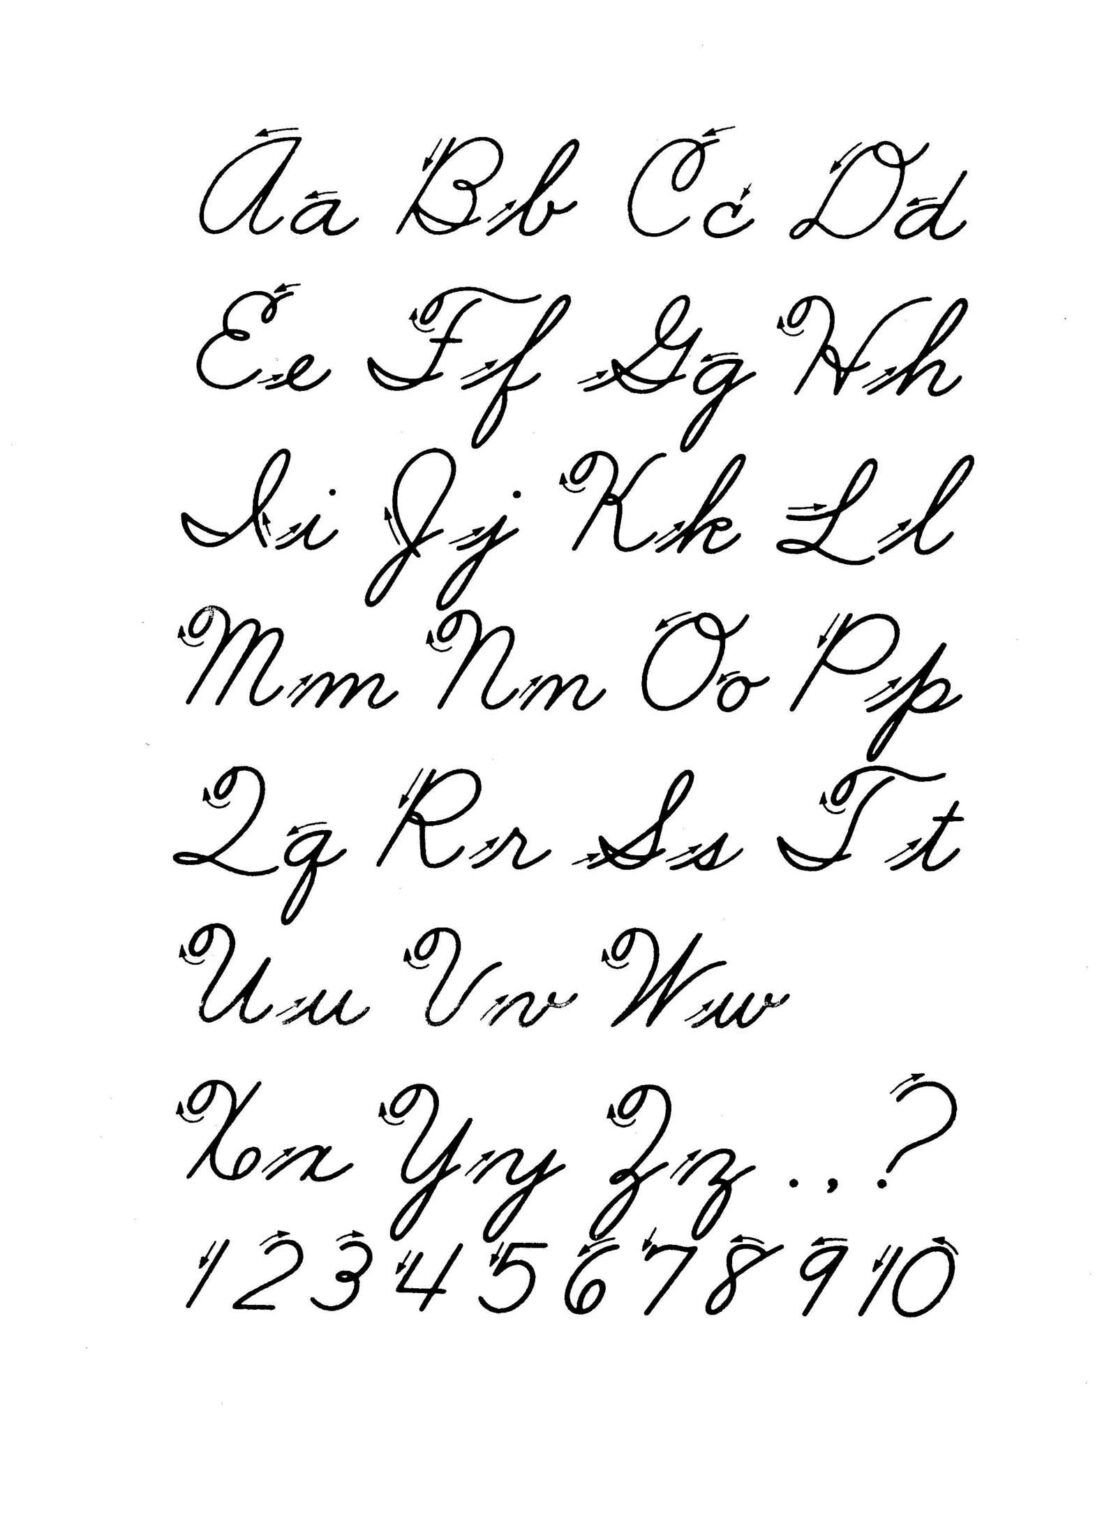 capital-cursive-letters-and-numbers-are-shown